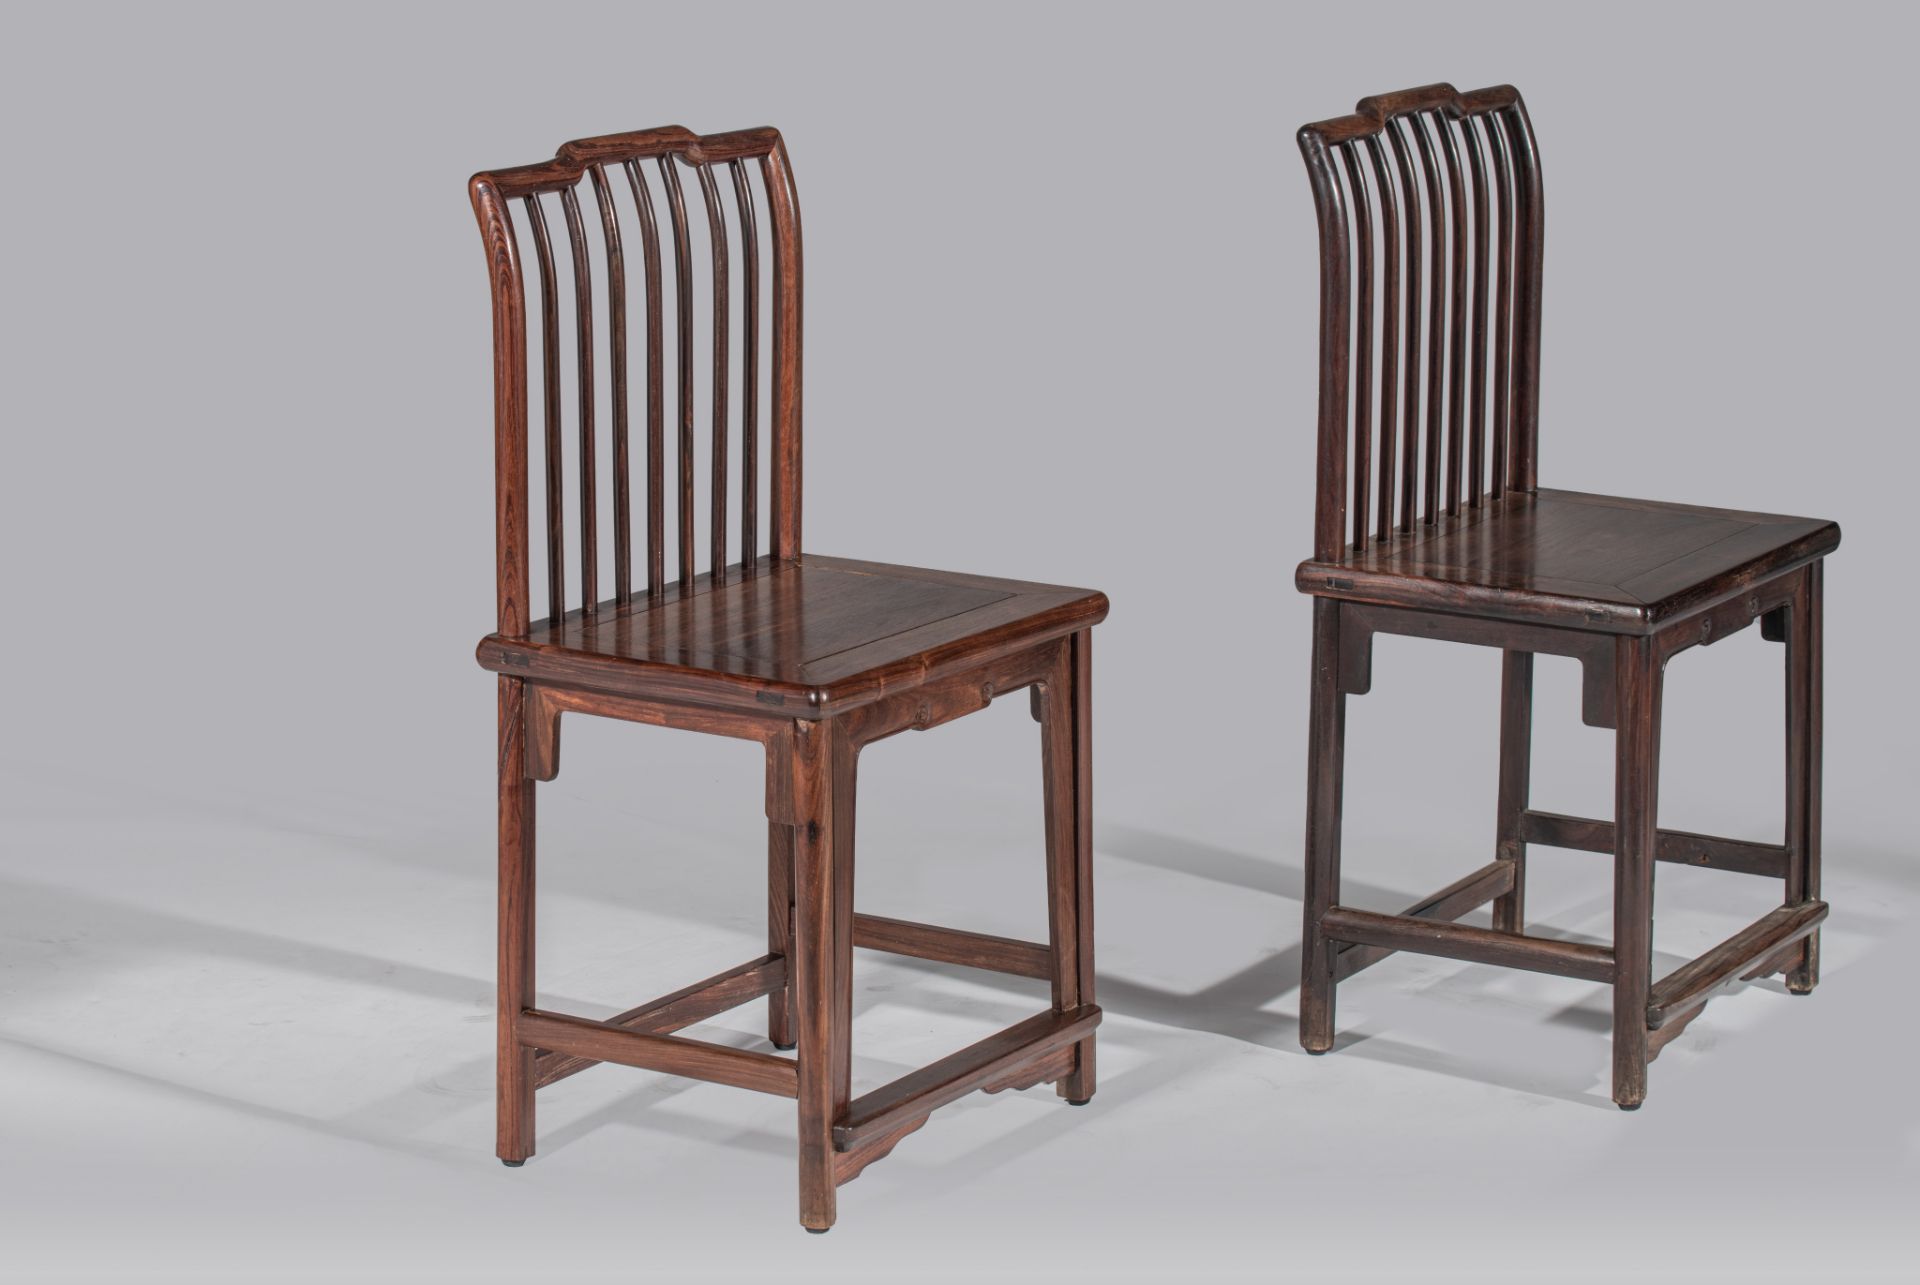 A pair of Chinese hardwood spindle back chairs, Republic period, H 92 - W 52,5 - D 40 cm - Image 2 of 8